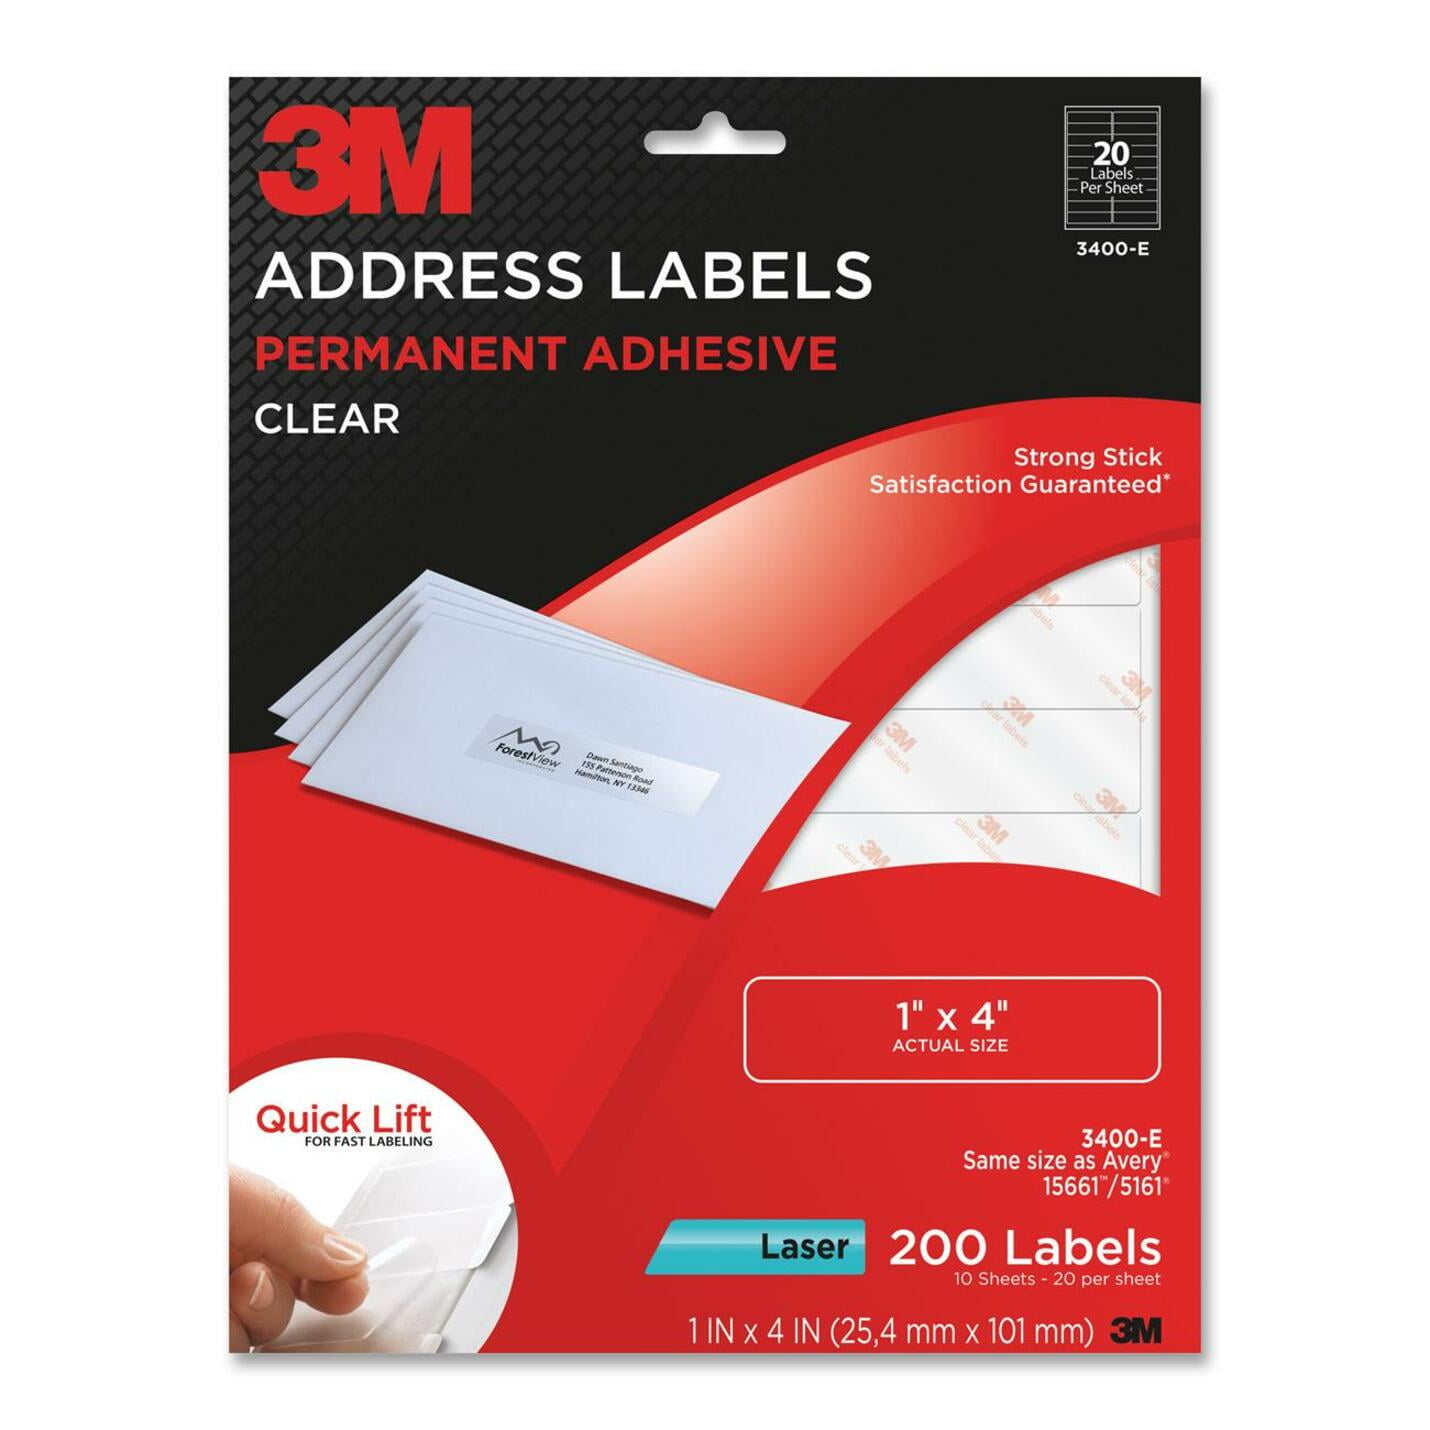 21M Address Label With 3M Label Templates